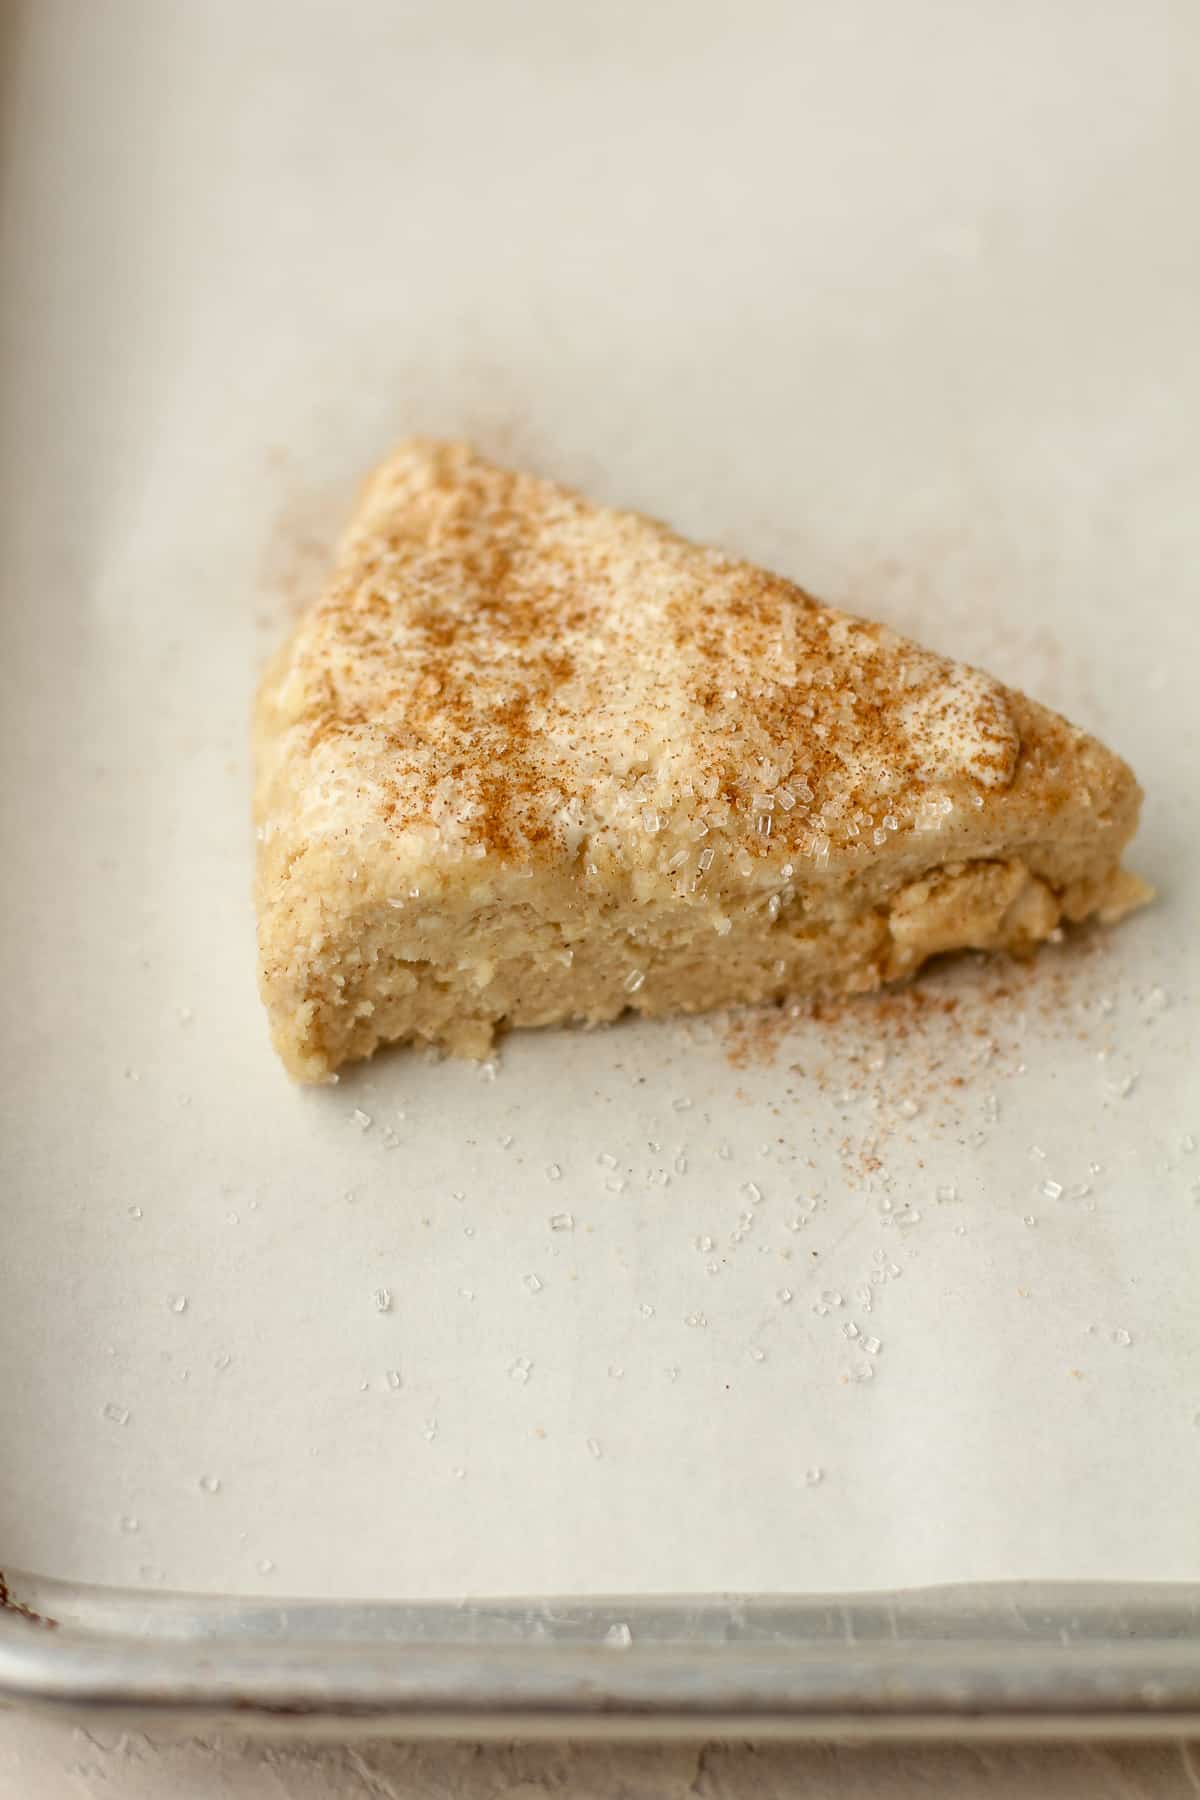 Side view of a scone triangle with sparkling sugar and cinnamon.